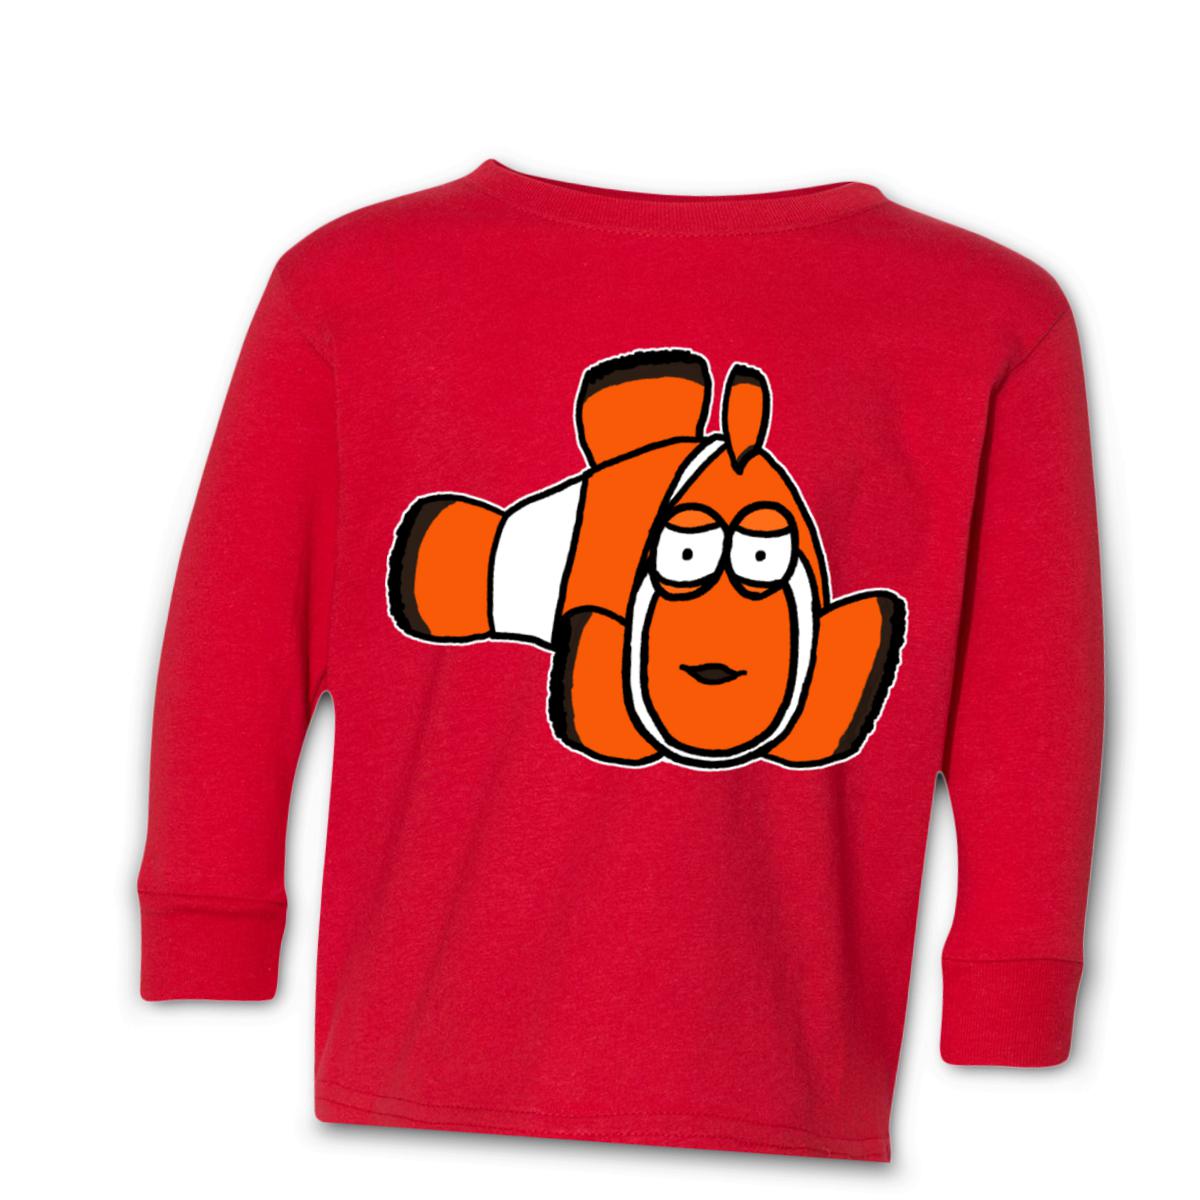 Clown Fish Toddler Long Sleeve Tee 2T red